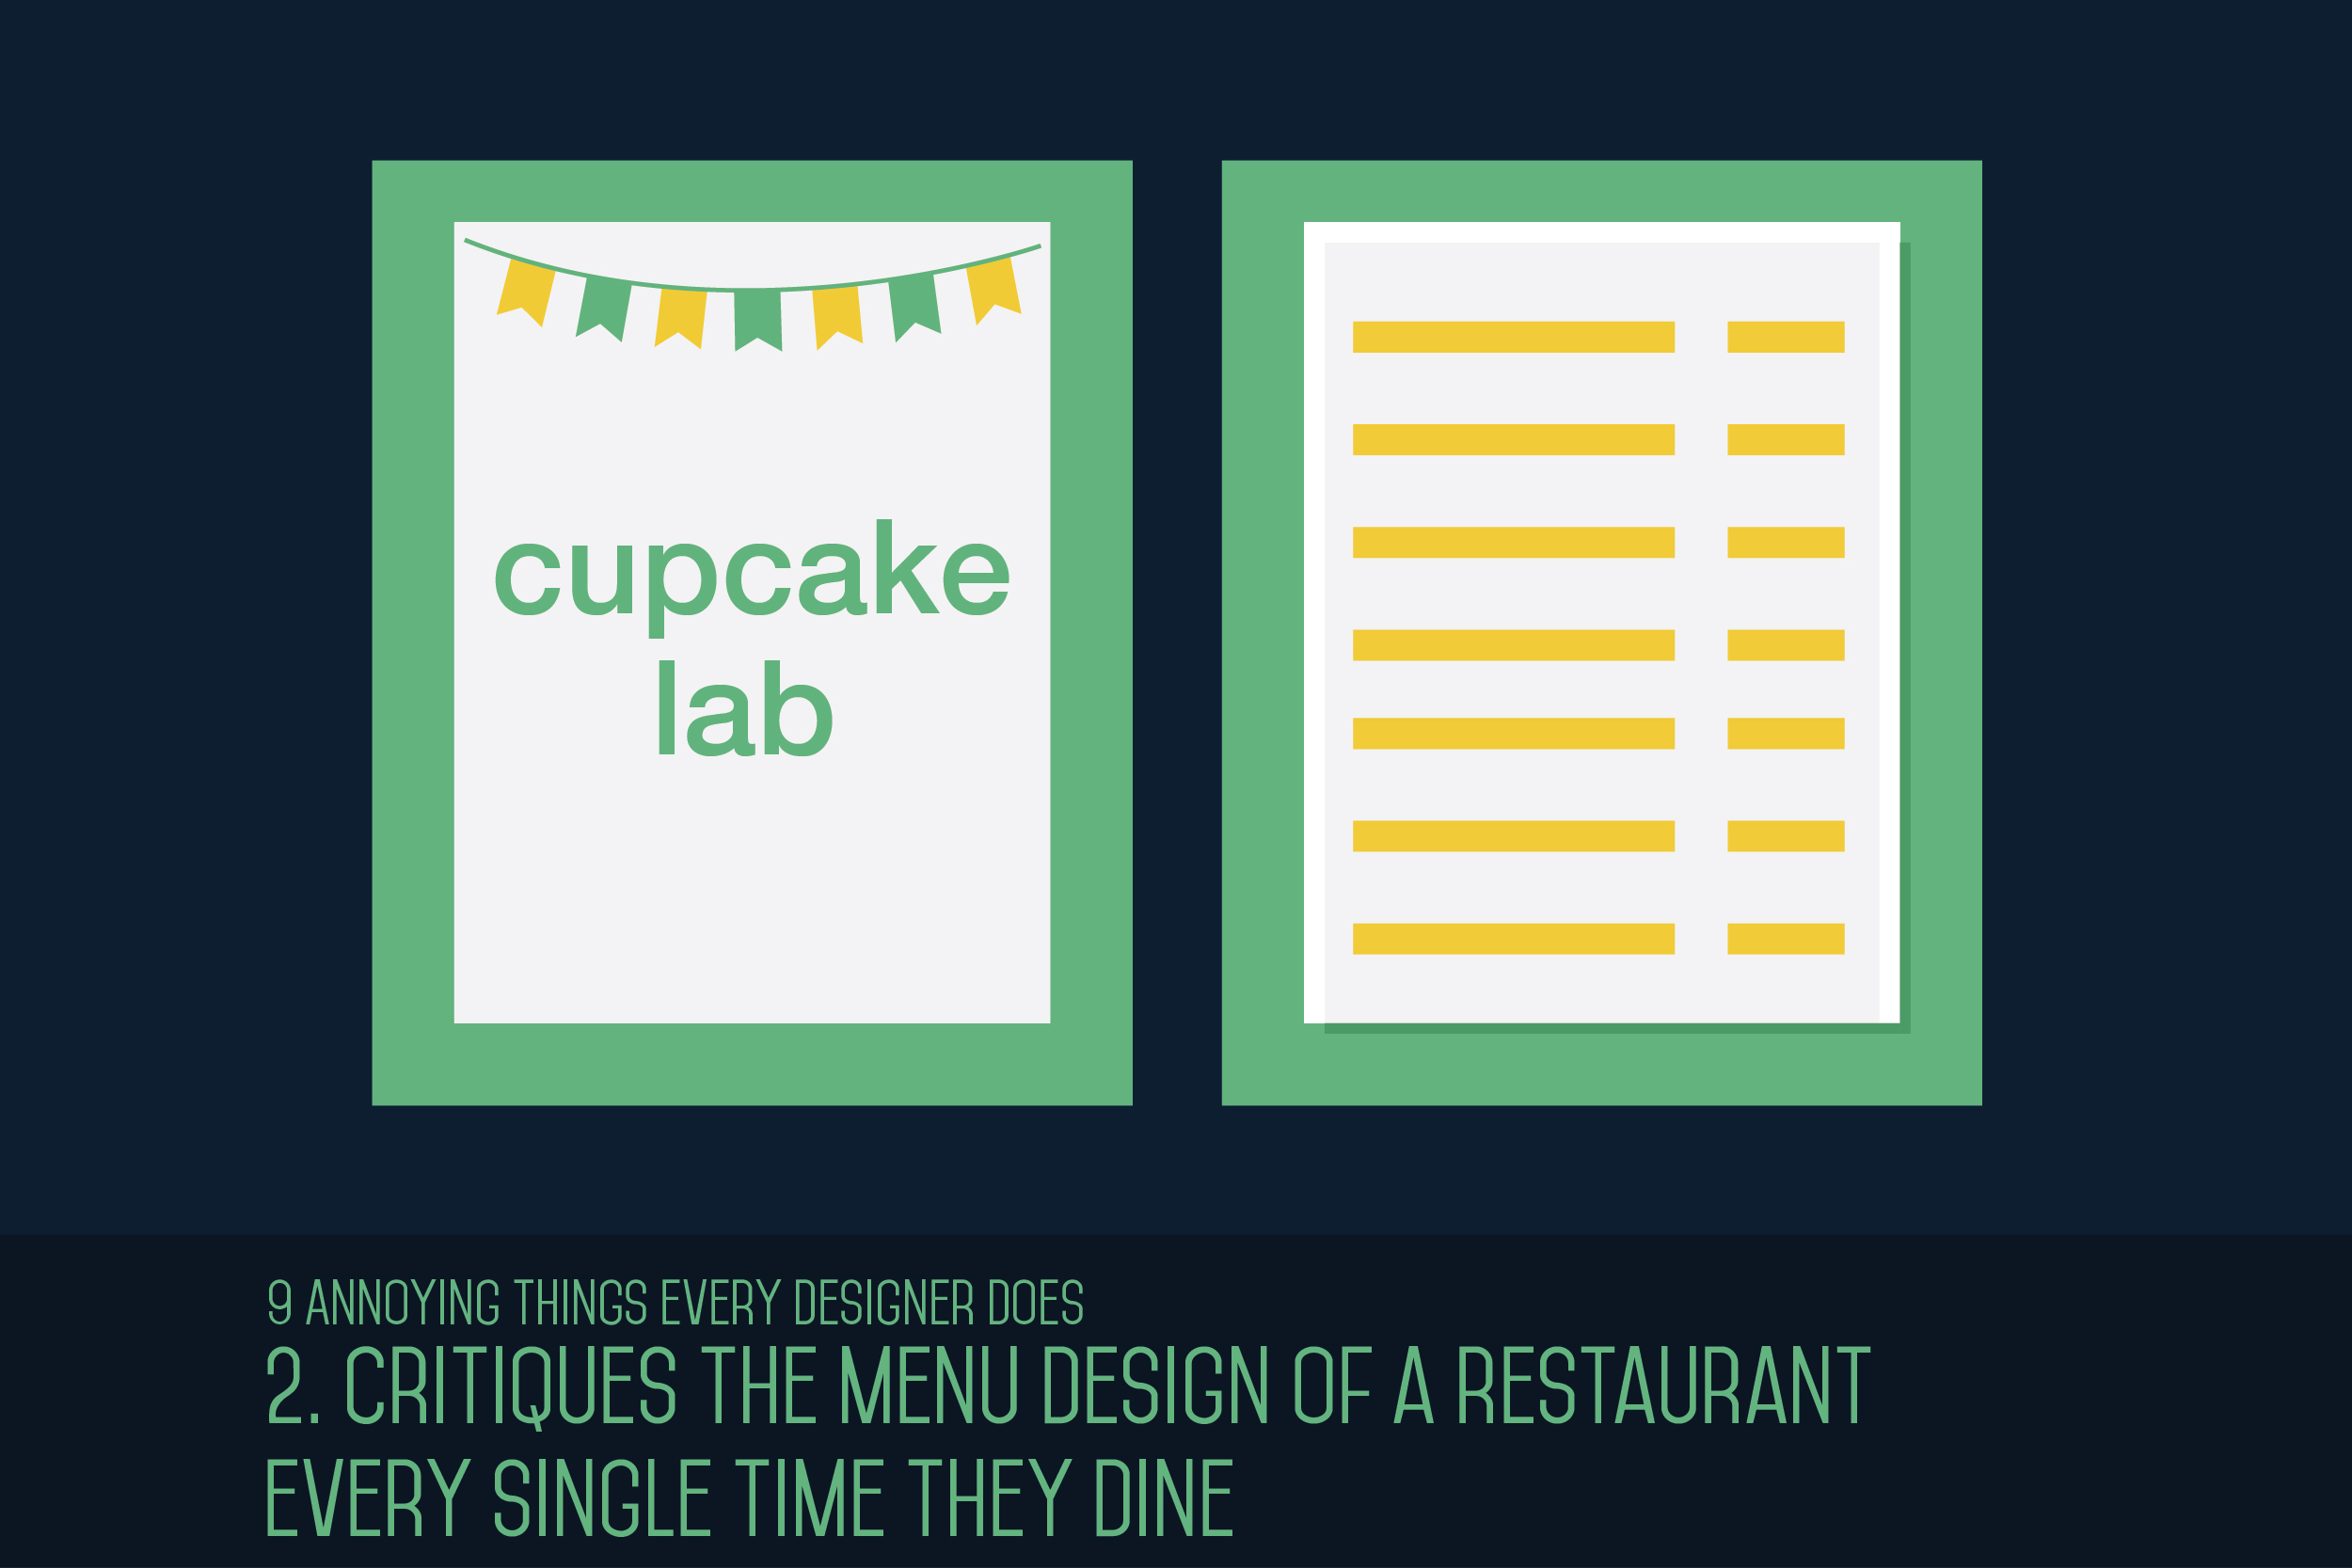 9-annoying-things-every-designer-does-2